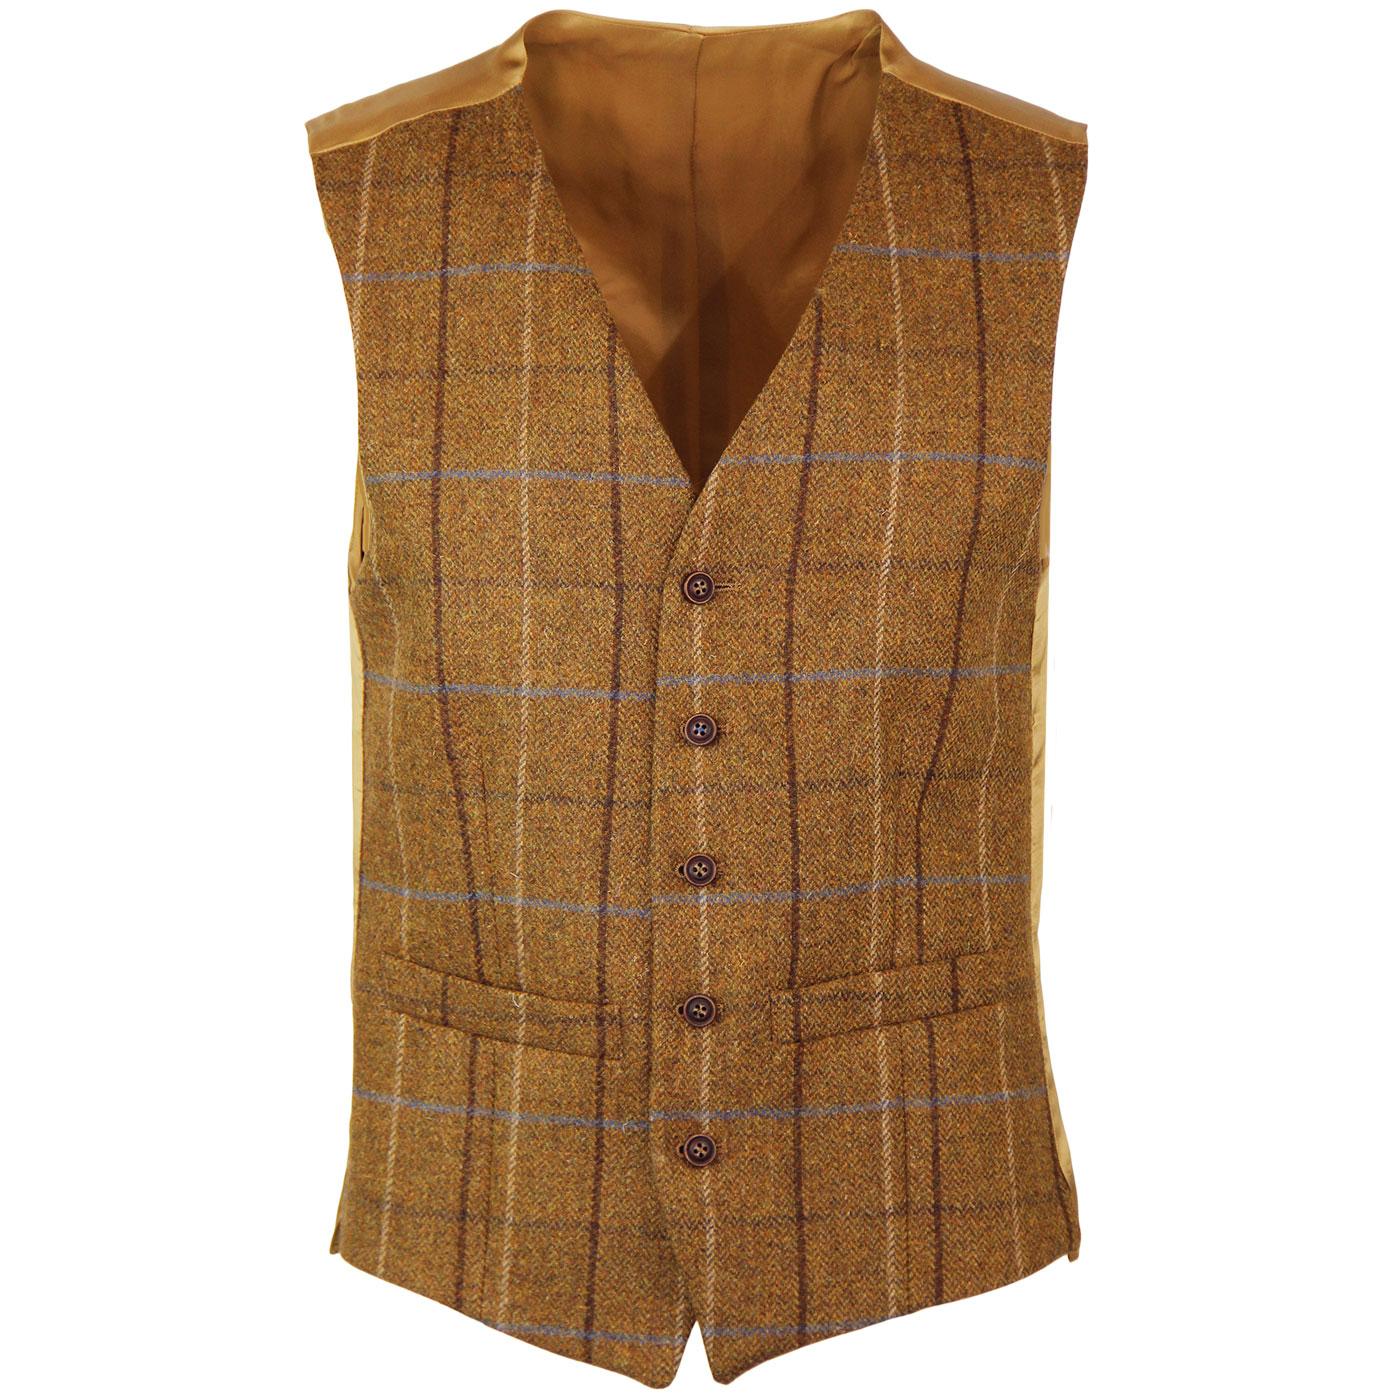 Men's 1960s Mod Tailored Four Colour Check Waistcoat in Gold